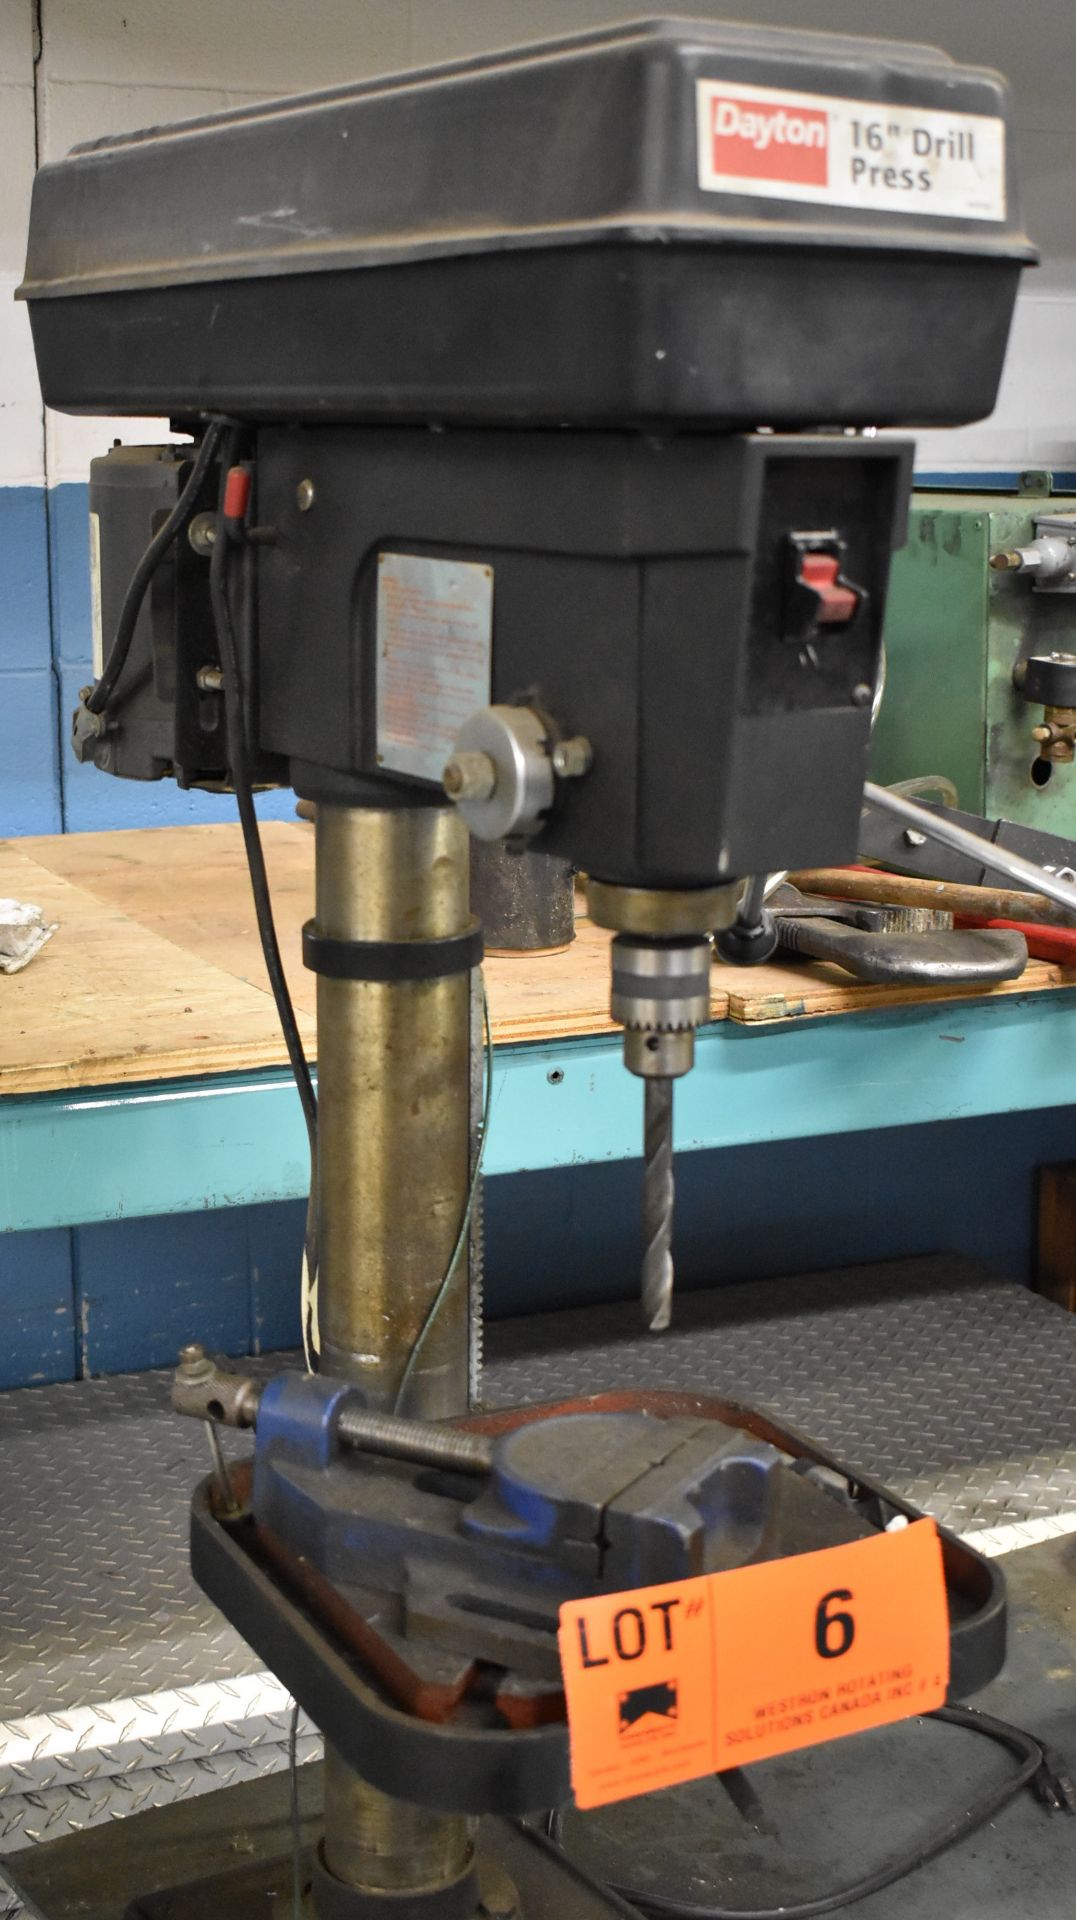 LOT/ DAYTON 16" BENCH-TYPE DRILL PRESS WITH SPEEDS TO 2470 RPM, BALDOR 8" DOUBLE END BENCH GRINDER - Image 2 of 5